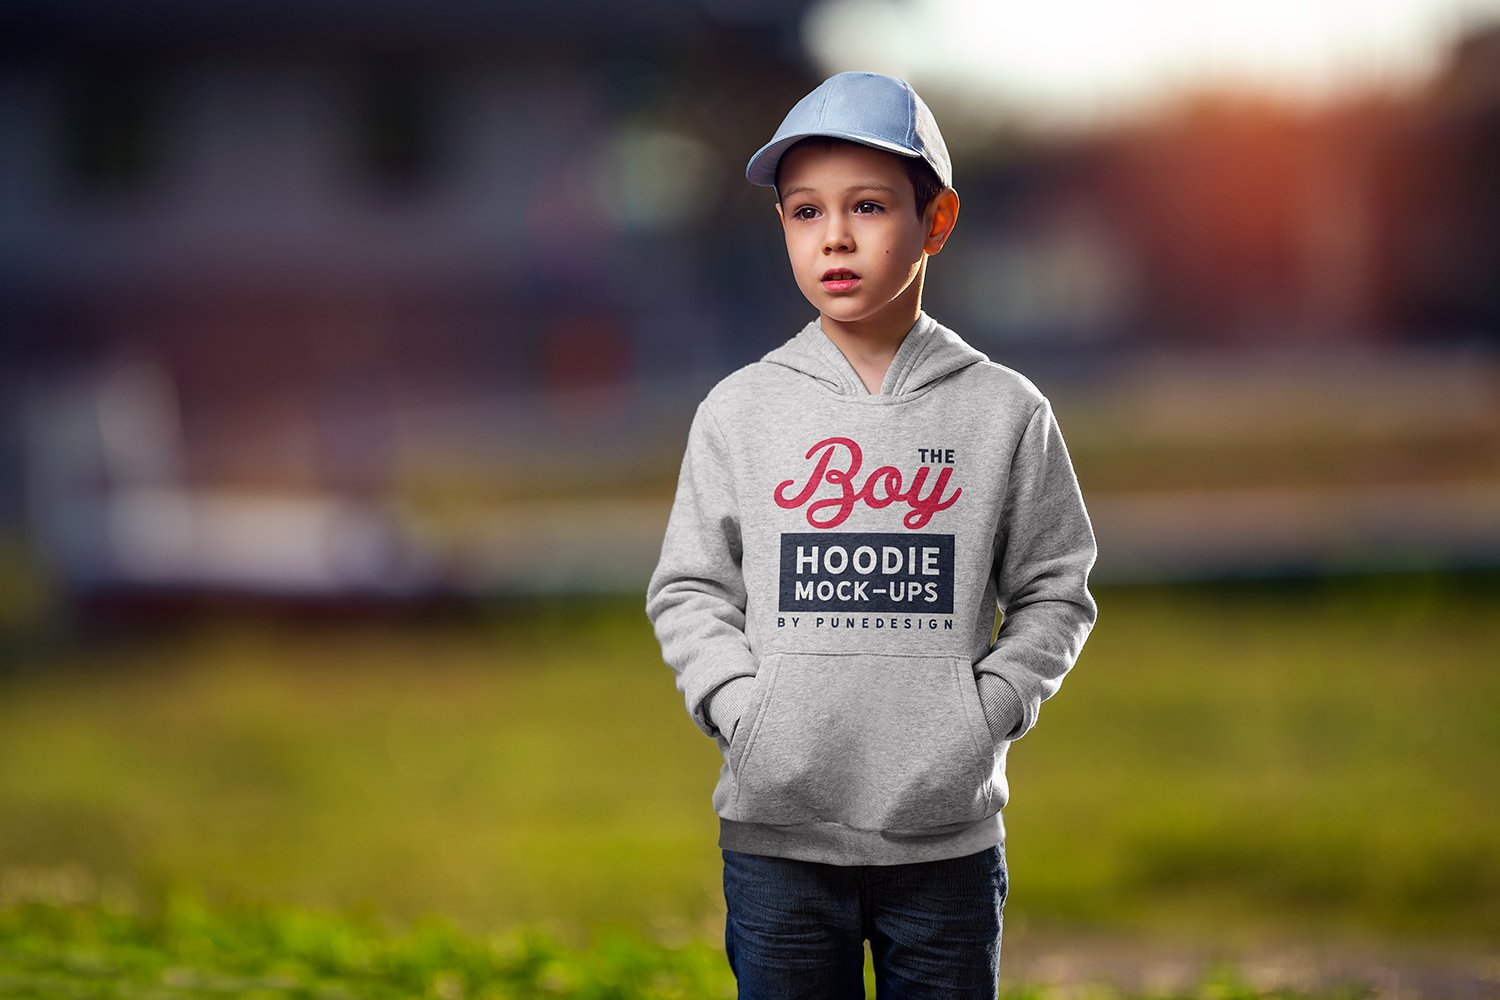 boy hoodie mock up by punedesign 02 362